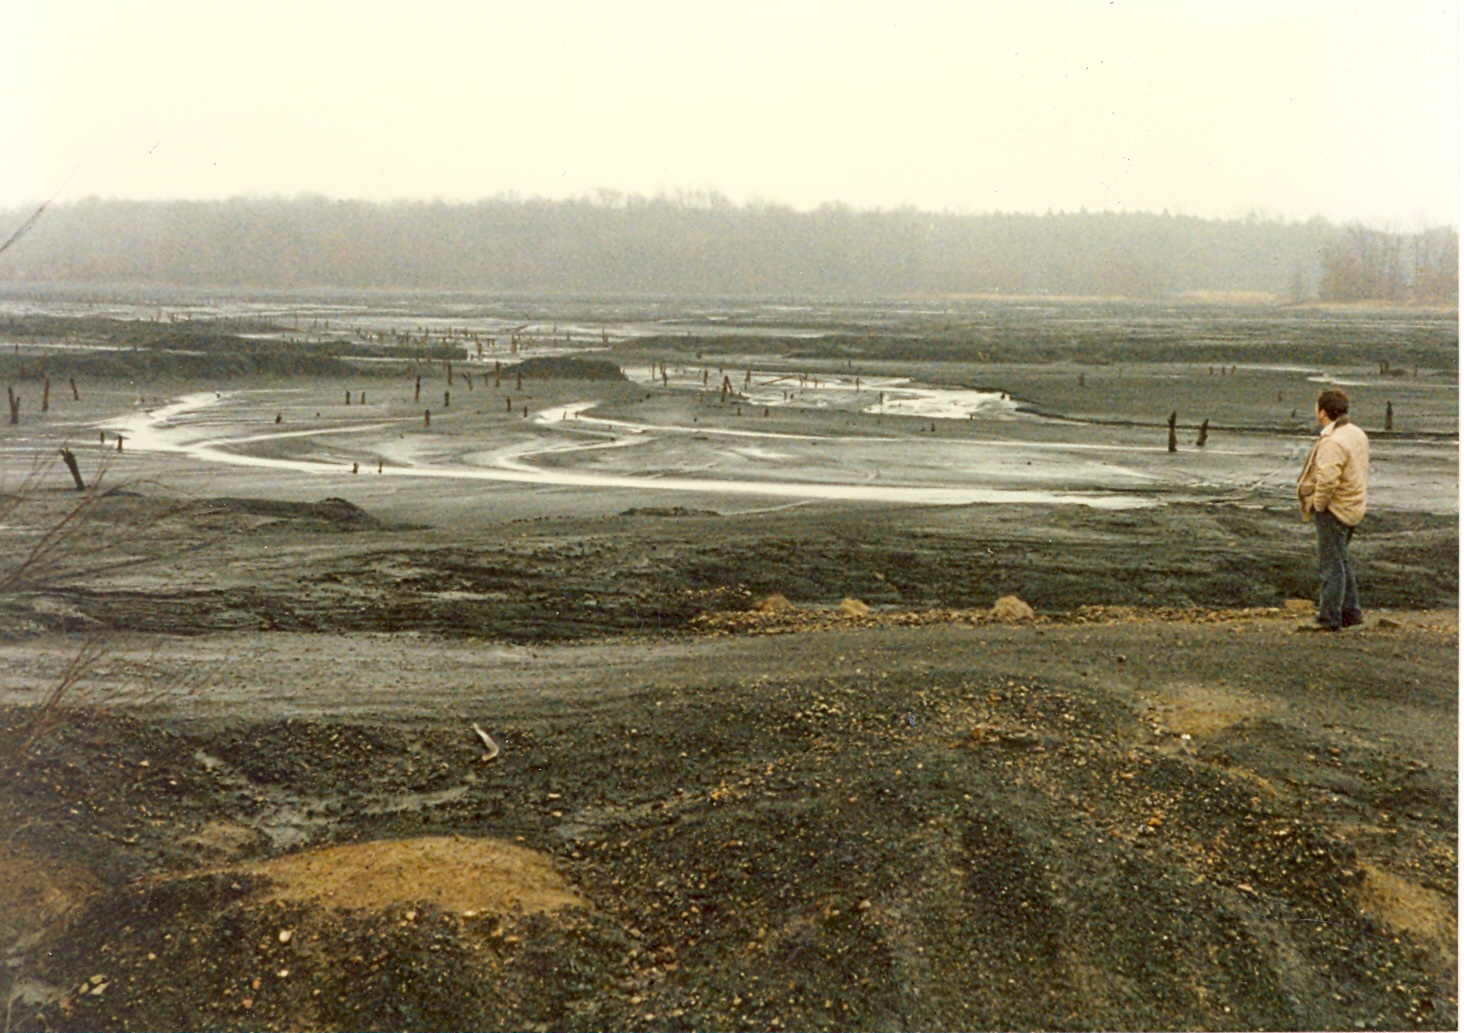 A deposit of fine-grained coal-preparation refuse (slurry) after reclamation